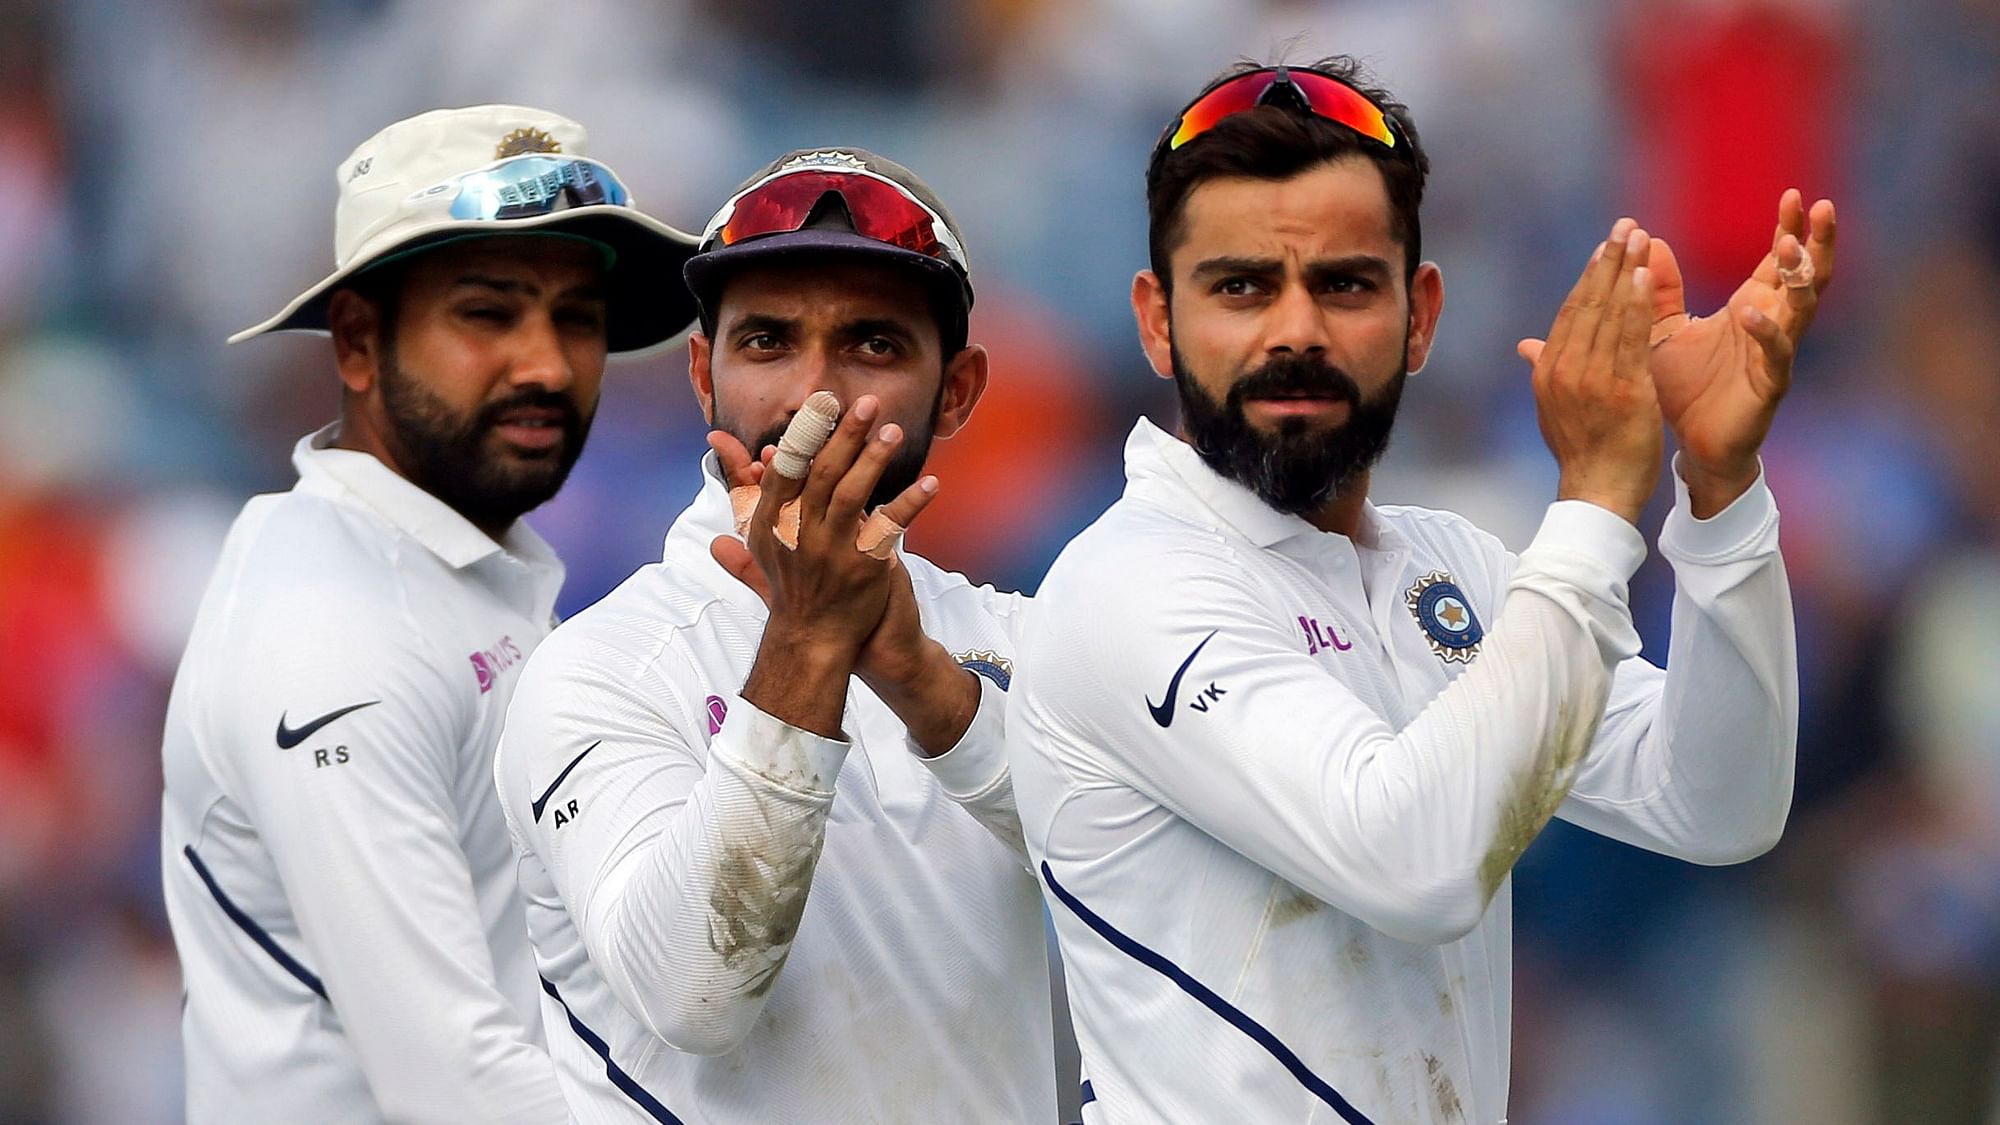 India versus South Africa 3rd Test LIVE Score Streaming on Hotstar,DD Sports,Star Sports: Everything you need to know about India vs South Africa 3rd Test.